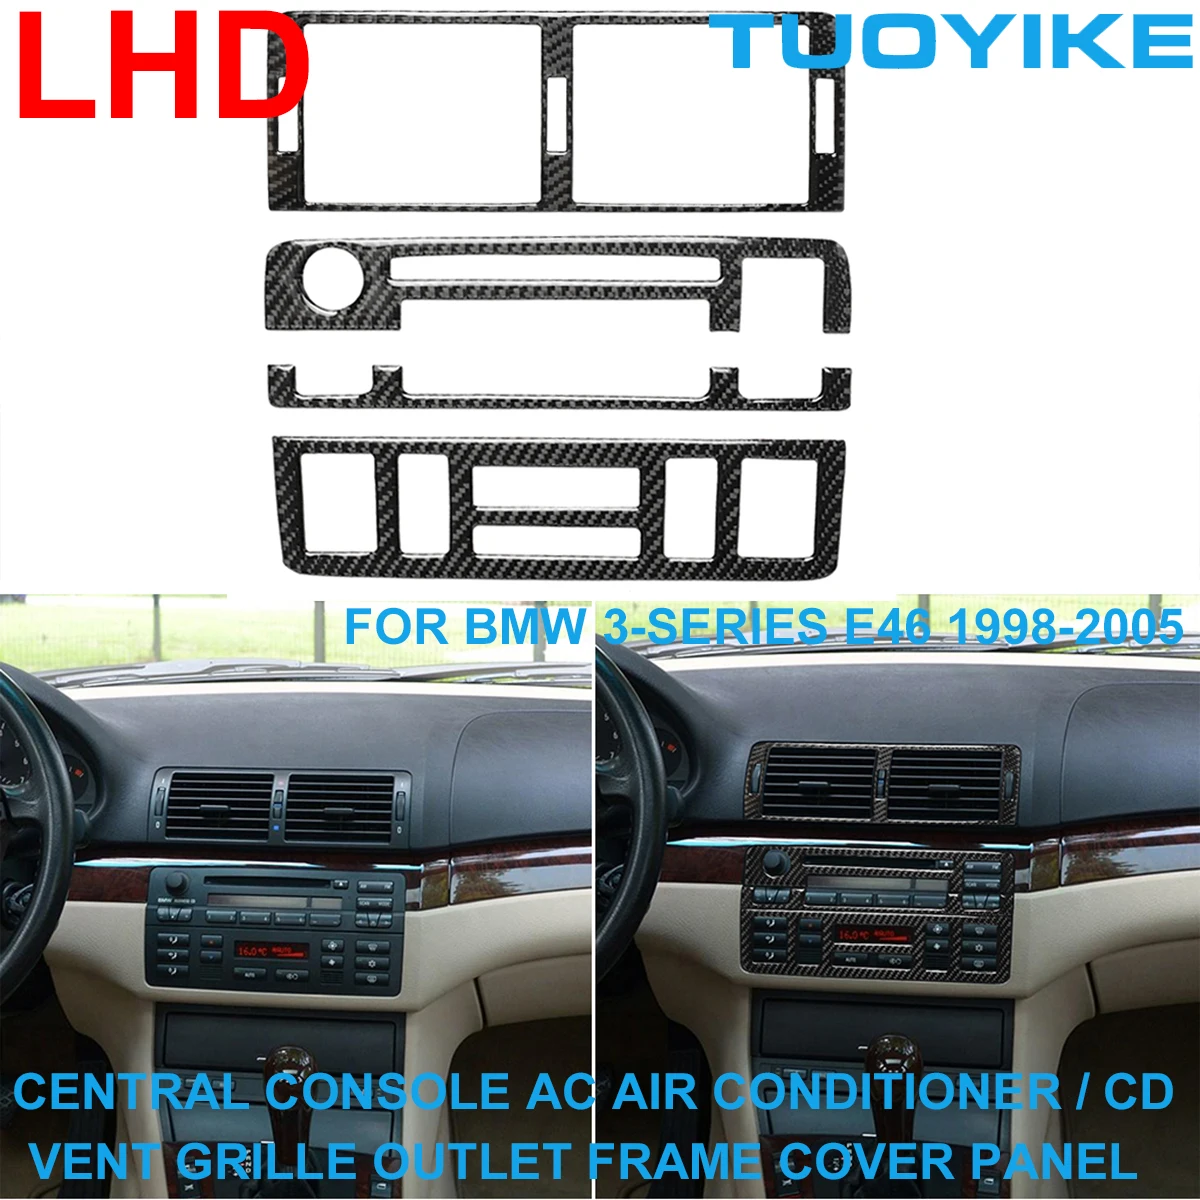 

LHD RHD Carbon Fiber Central Console AC Air Conditioner Vent Grille CD Button Frame Cover Panel For BMW 3-Series E46 1998-2005